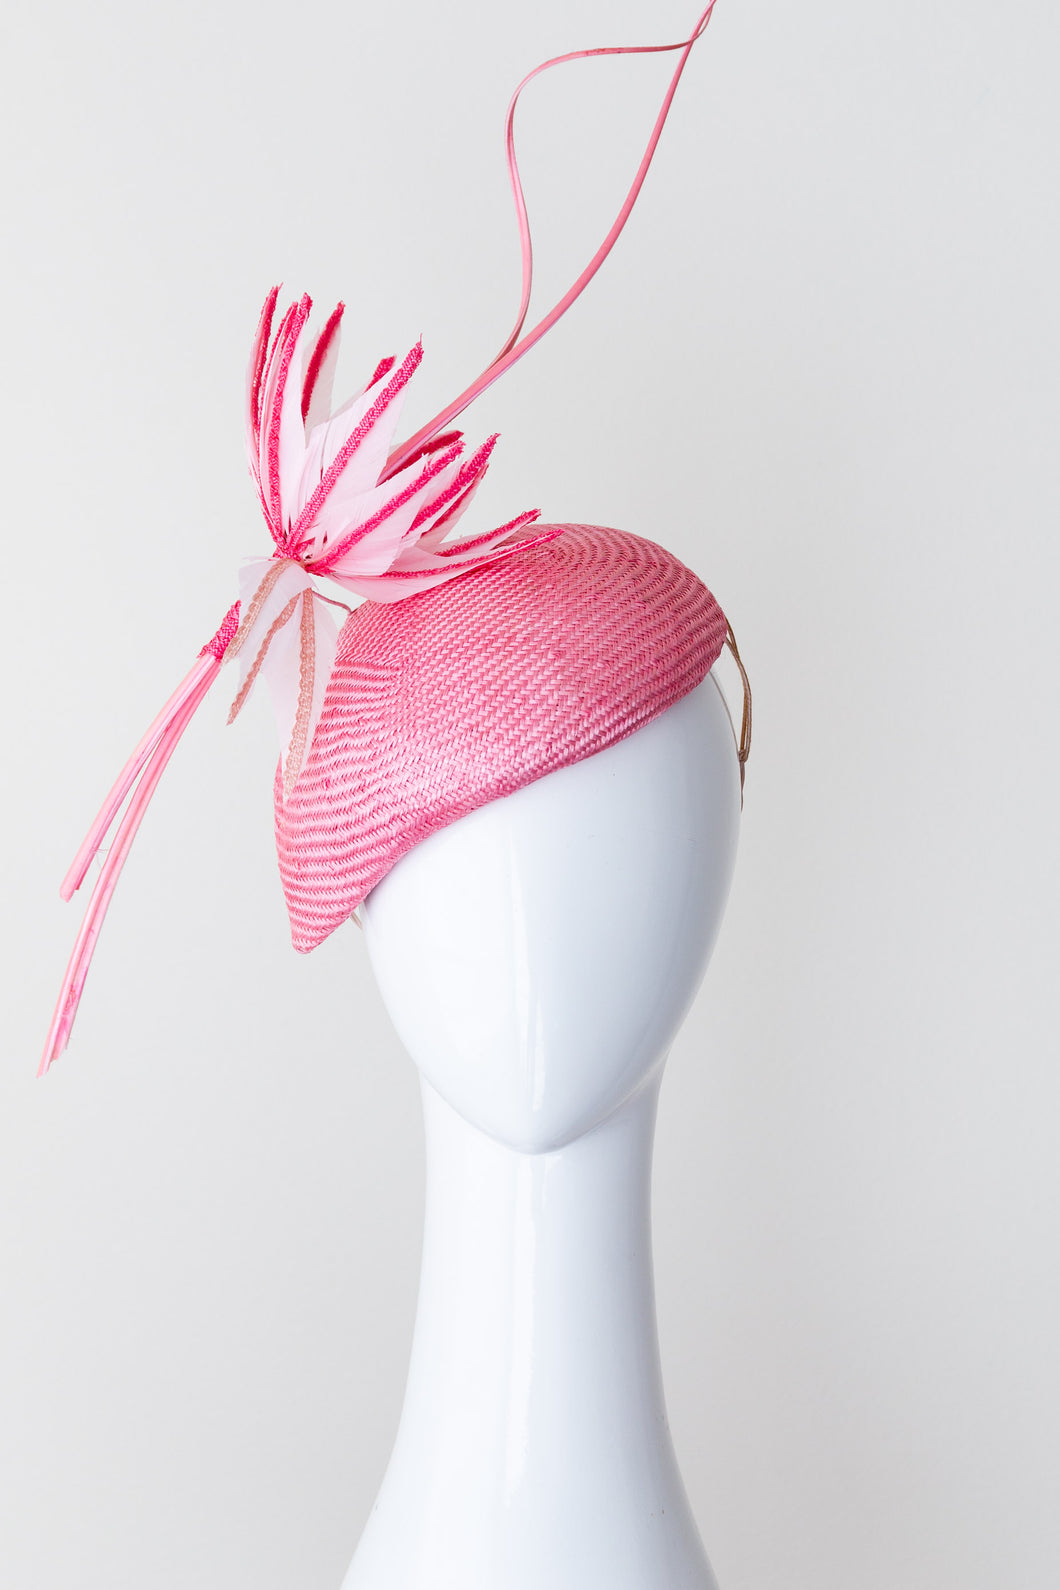 Pale Pink Side Hat with Floating Feather Flower By Felicity Northeast Millinery